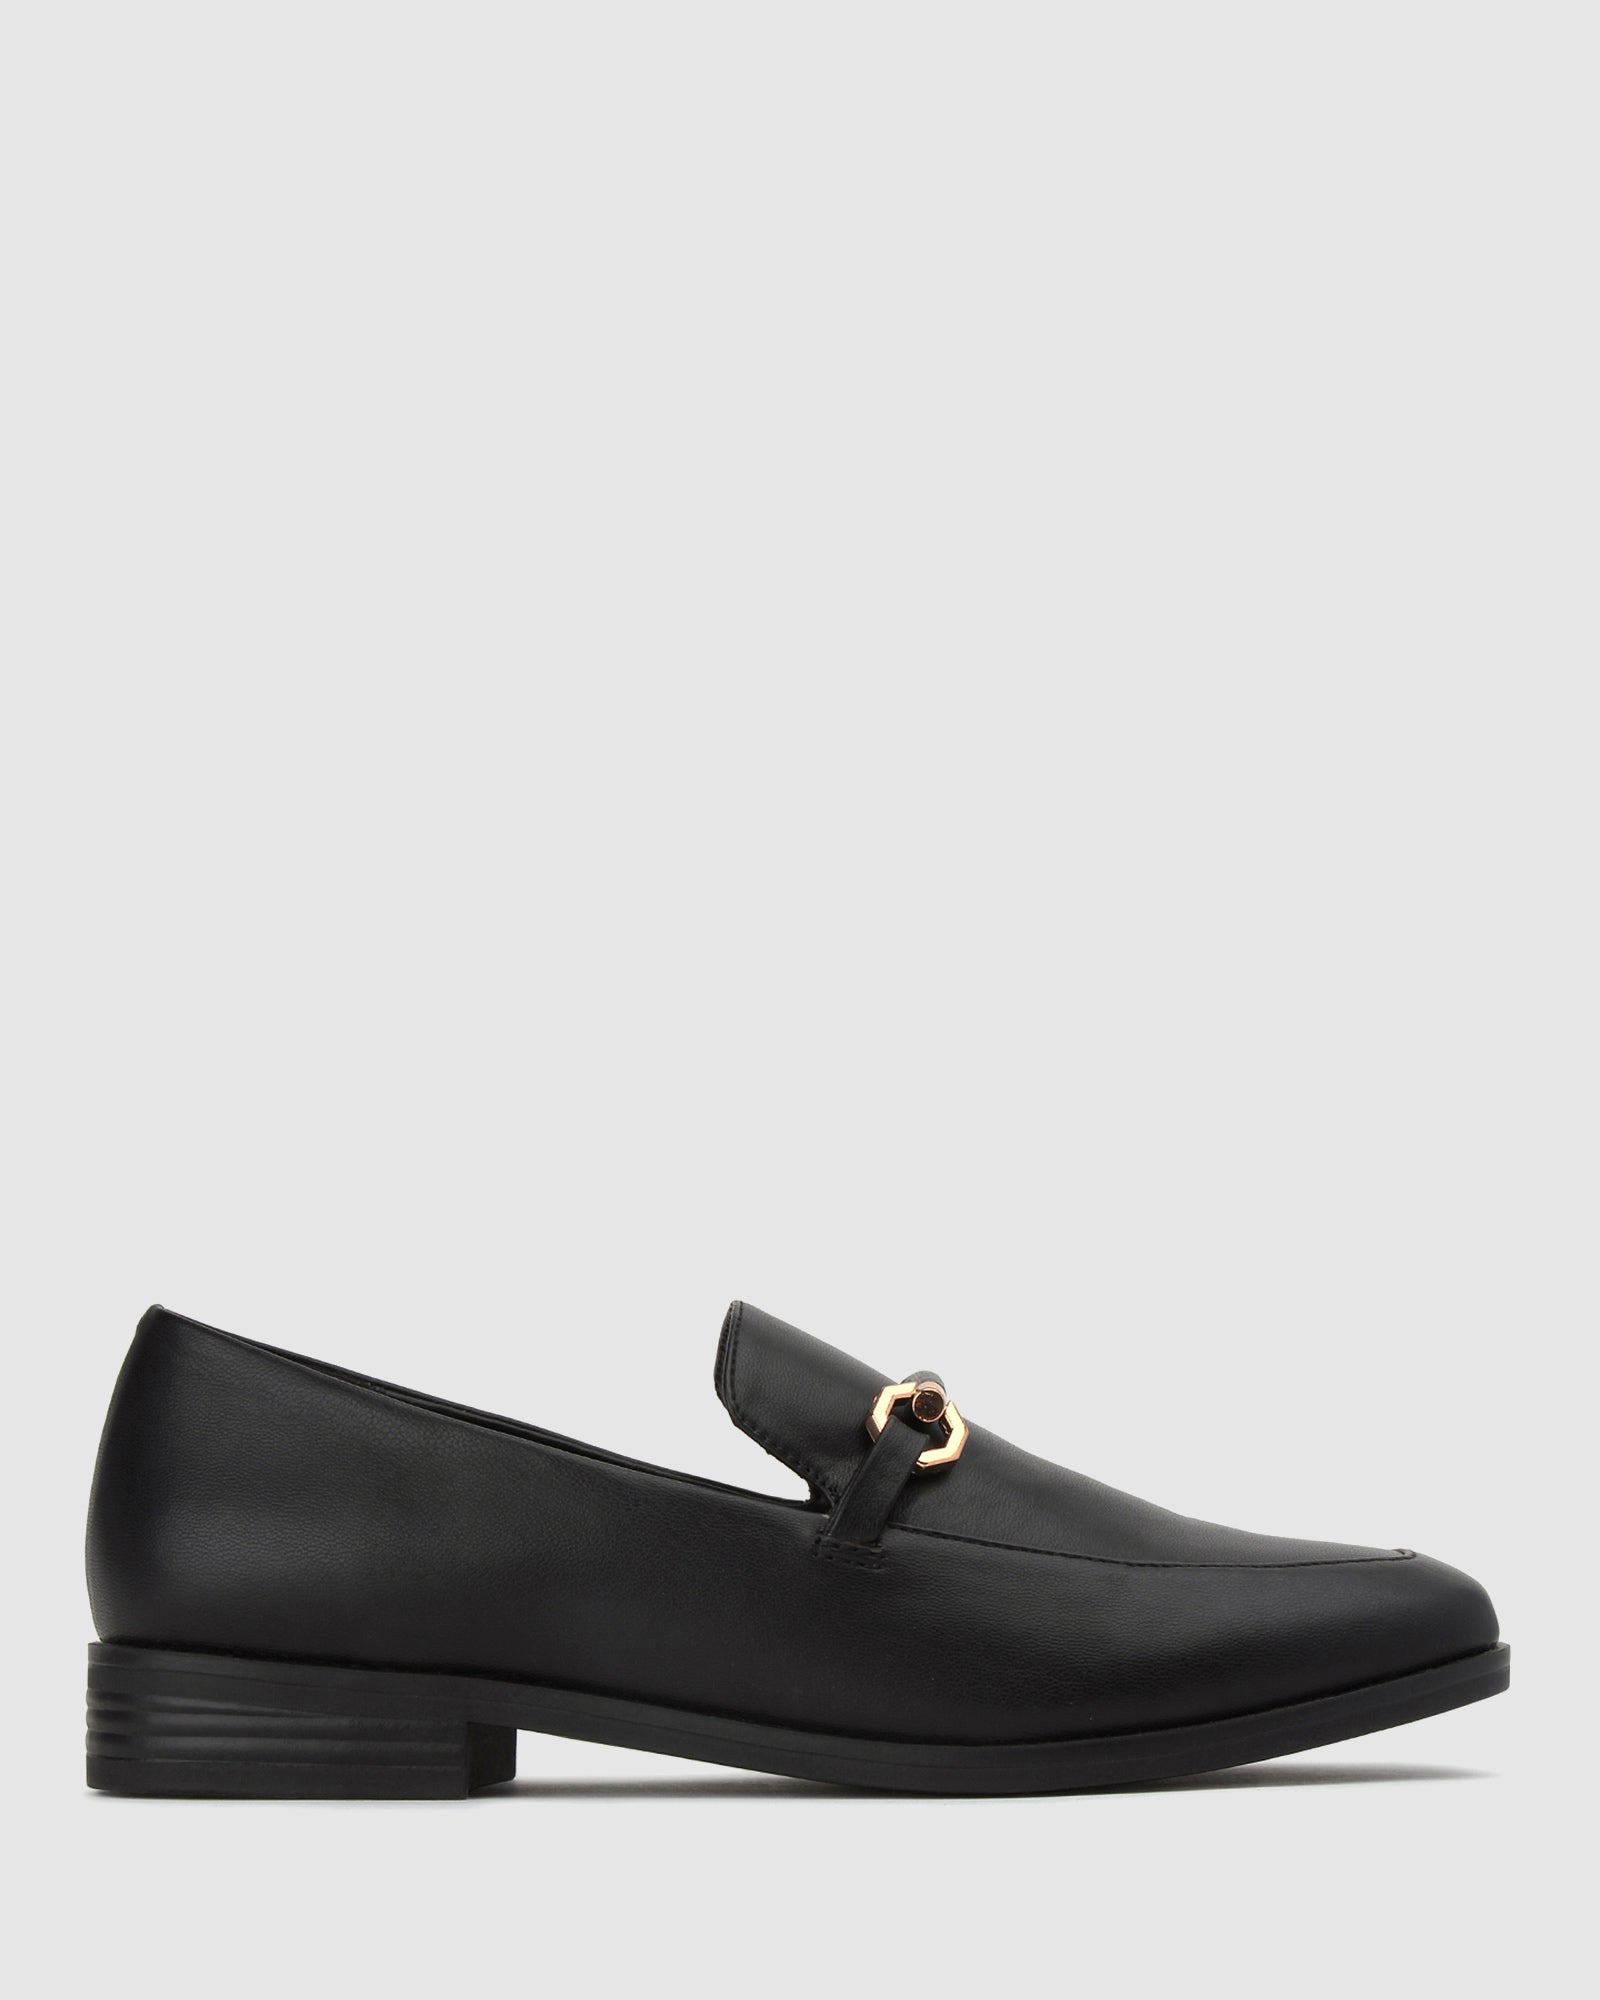 Buy BIANCA Square Toe Classic Loafers by Zeroe online - Betts